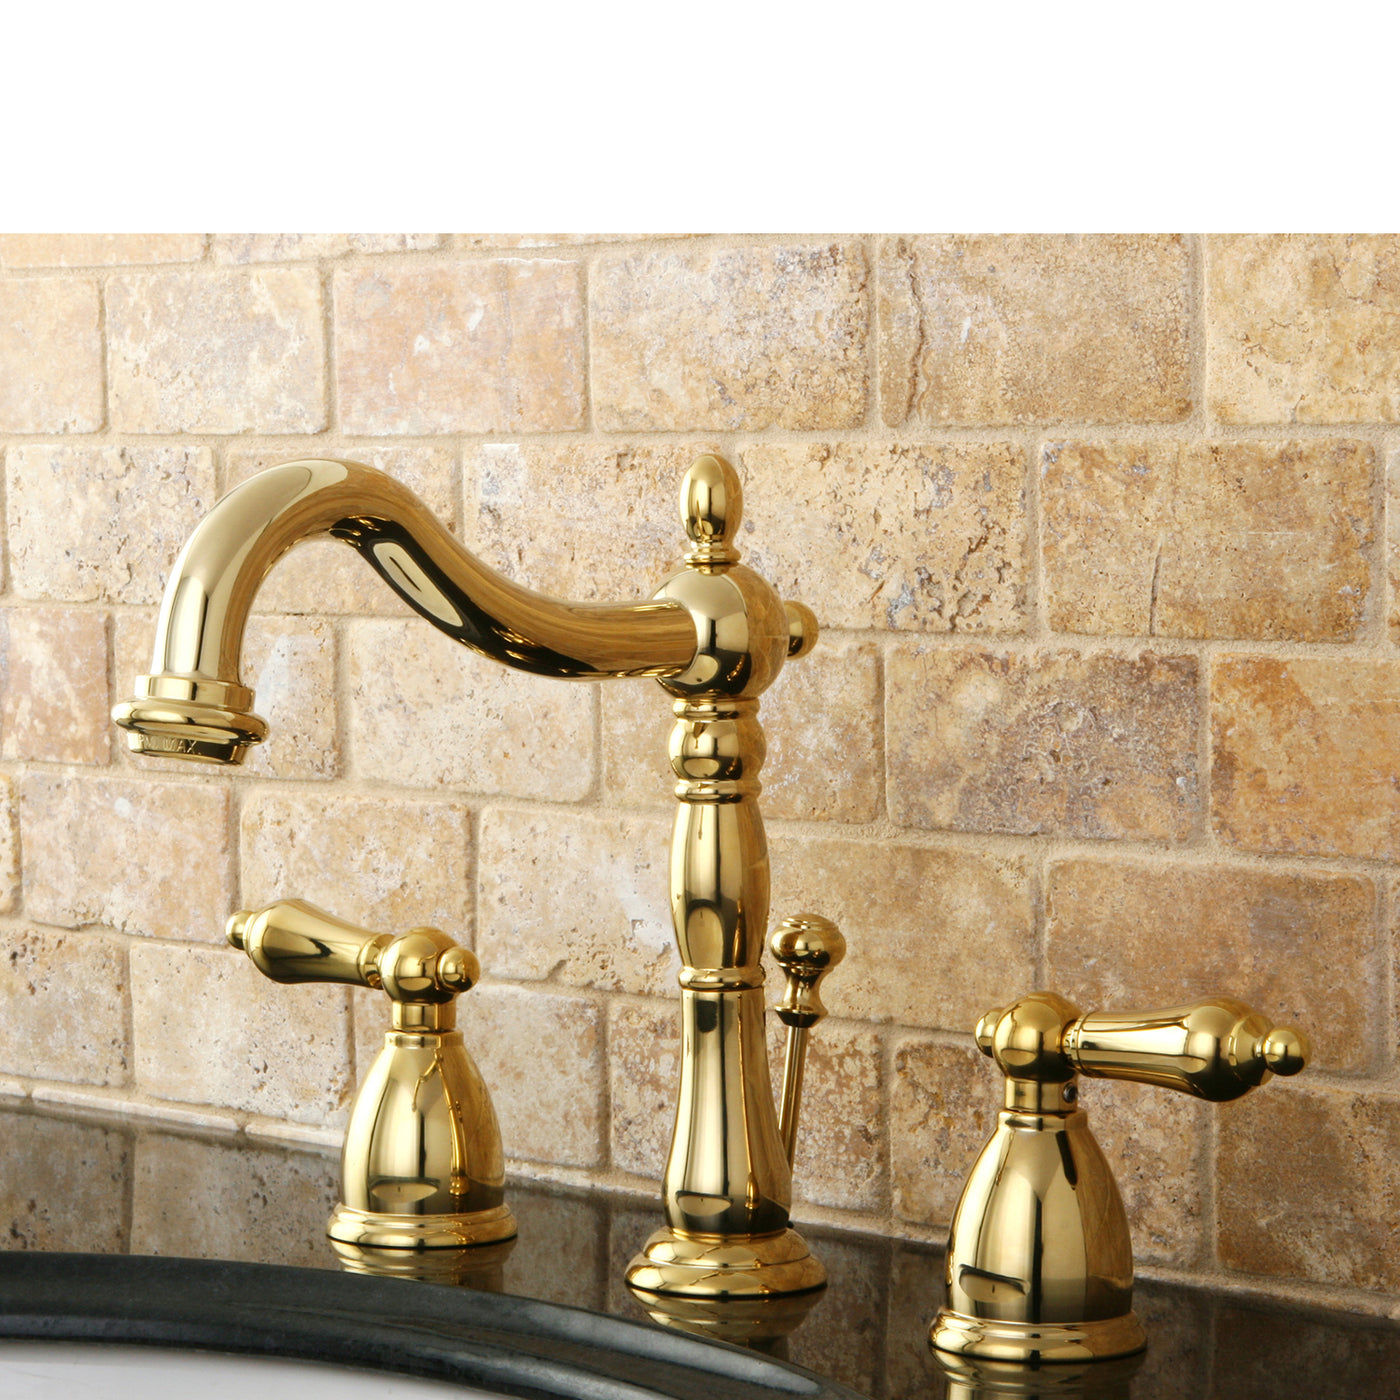 Elements of Design EB1972AL Widespread Bathroom Faucet with Brass Pop-Up, Polished Brass